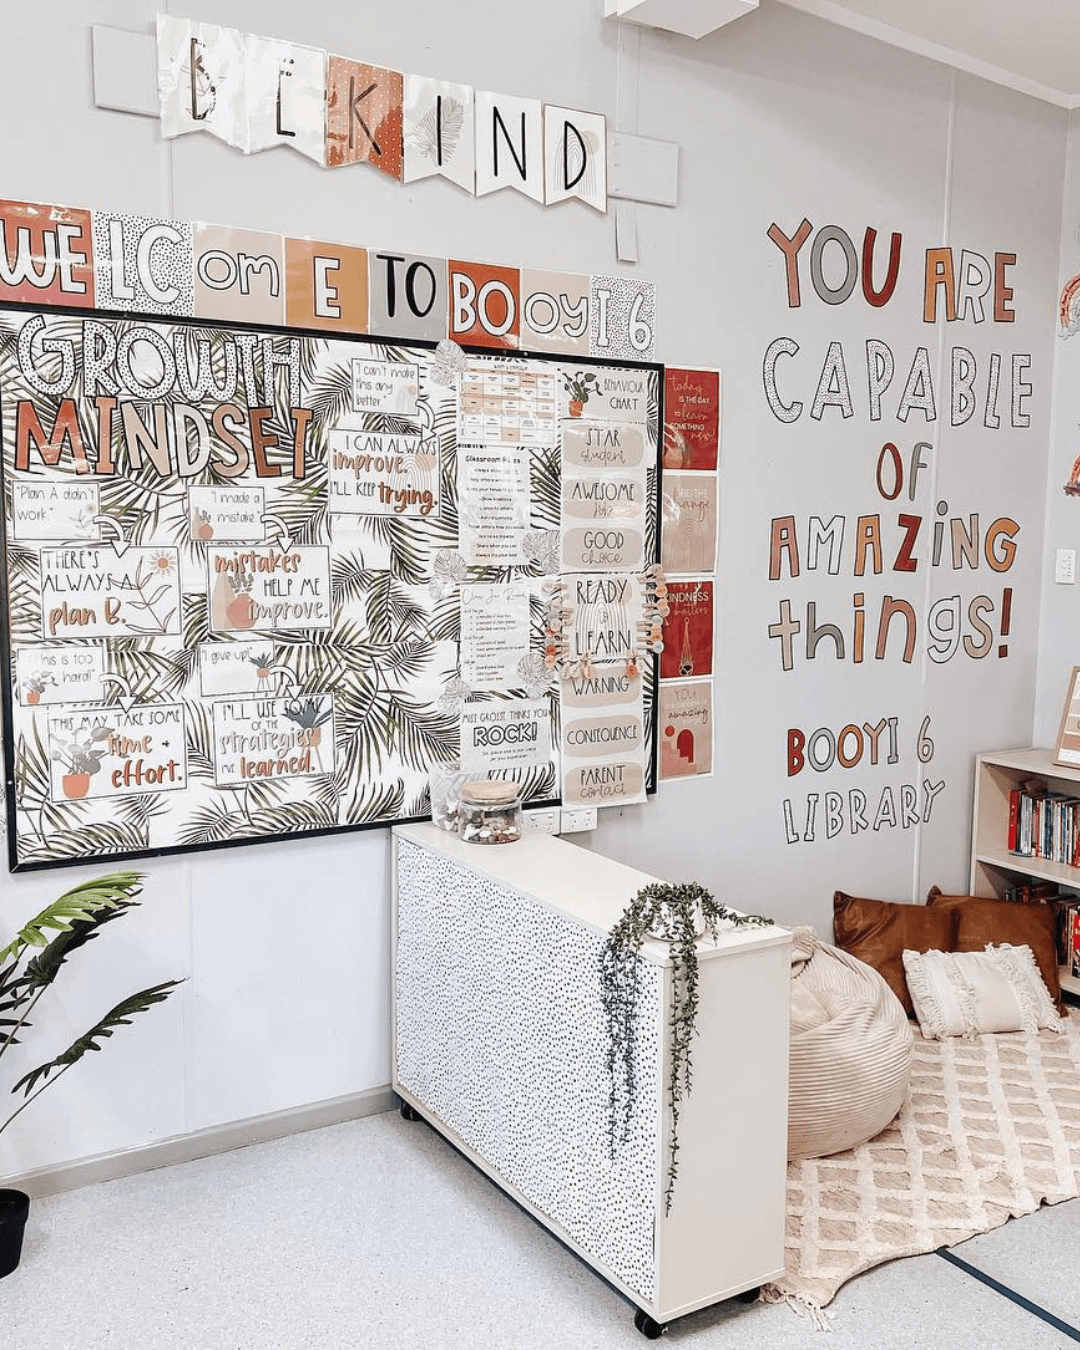 The left image shows a classroom with a range of wall displays, including bunting that says ‘be kind’ and large letters that spell ‘You are capable of amazing things’. It’s all from the Boho Vibes range. The right image shows three affirmations from the Spotty Boho range, they say ‘I am unique,’ ‘I am strong’ and ‘I am loved.’